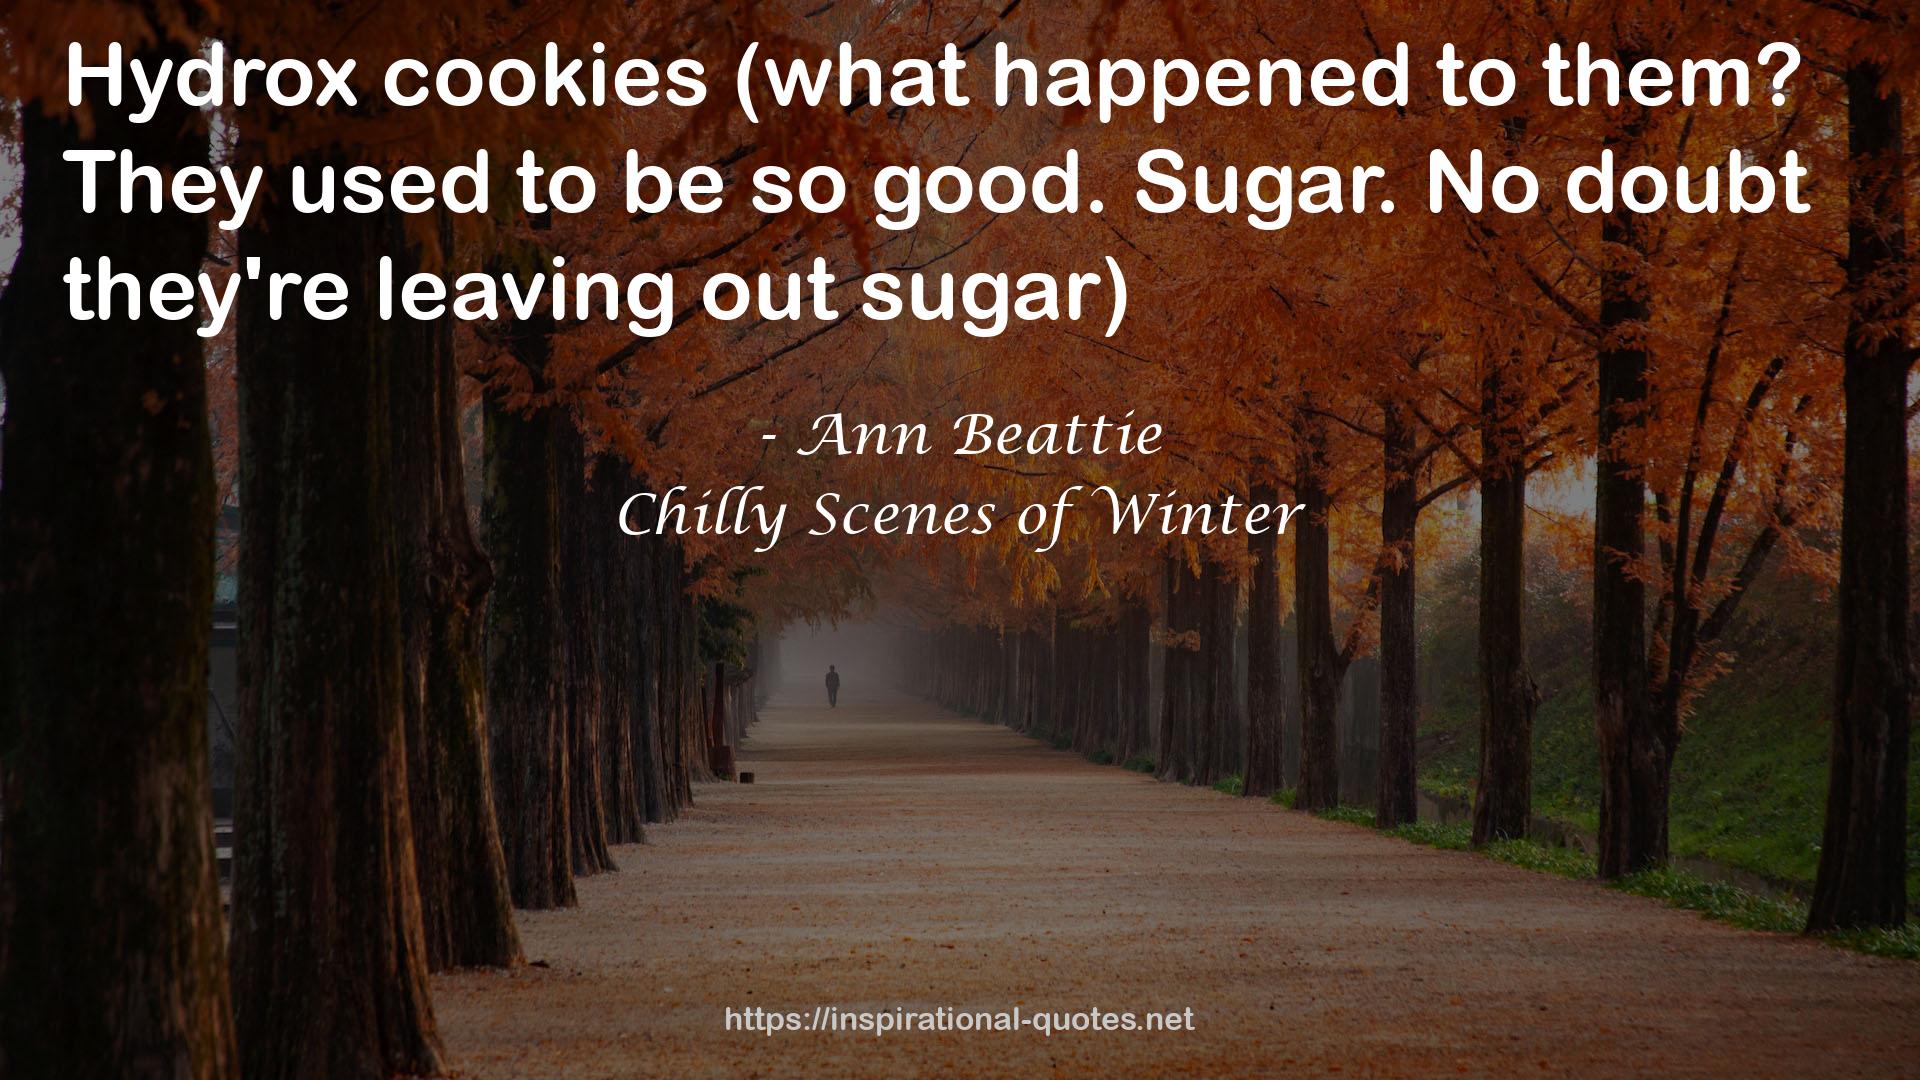 Chilly Scenes of Winter QUOTES